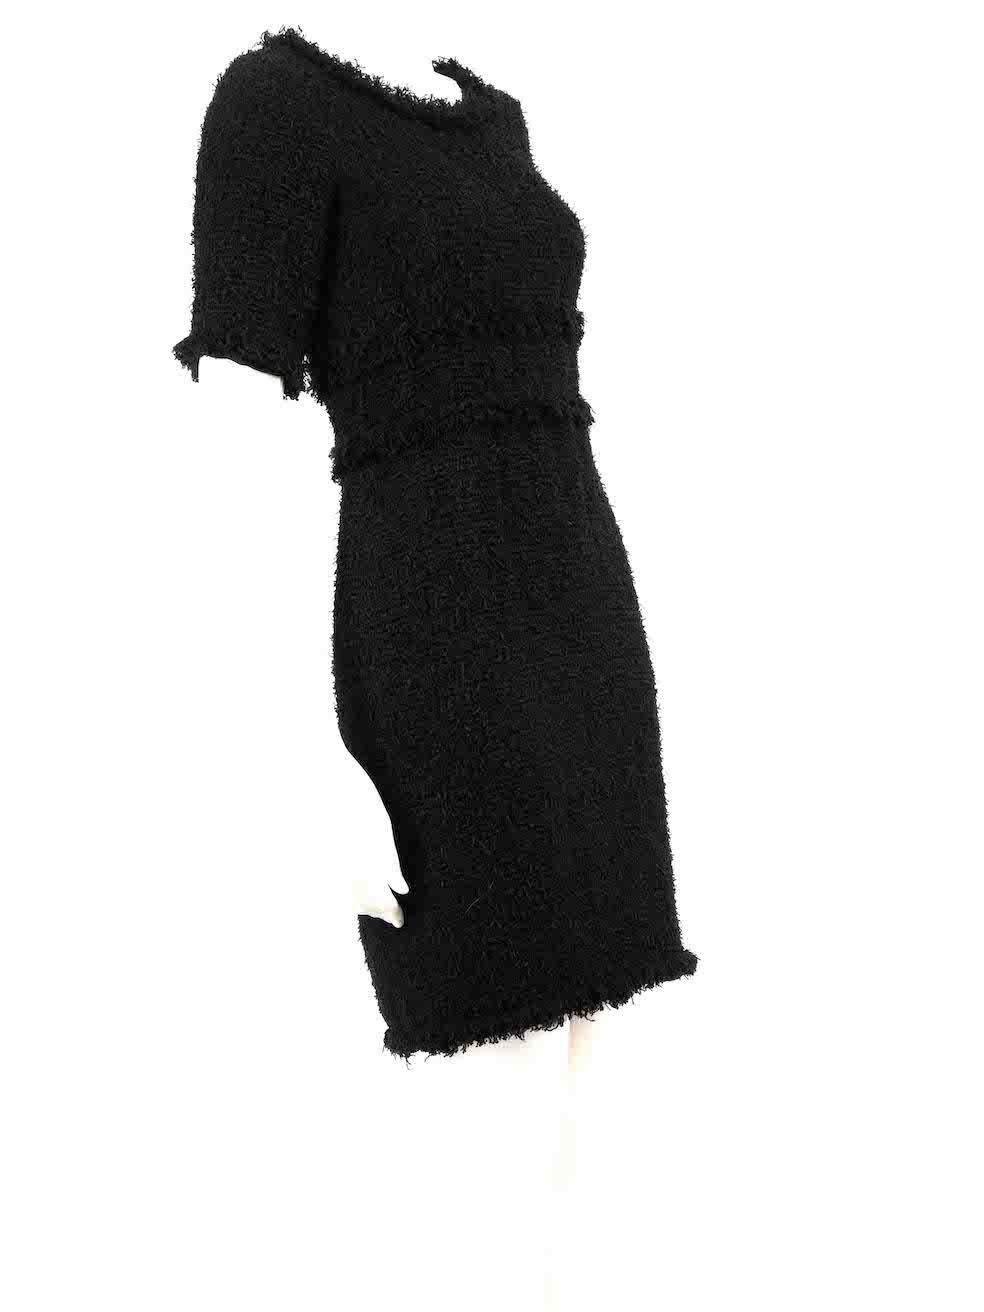 CONDITION is Very good. Minimal wear to dress is evident. Minimal wear to the neckline and underarm linings with light marks on this used Chanel designer resale item.
 
 
 
 Details
 
 
 Black 
 
 Tweed
 
 Dress
 
 Short sleeves
 
 Knee length
 
